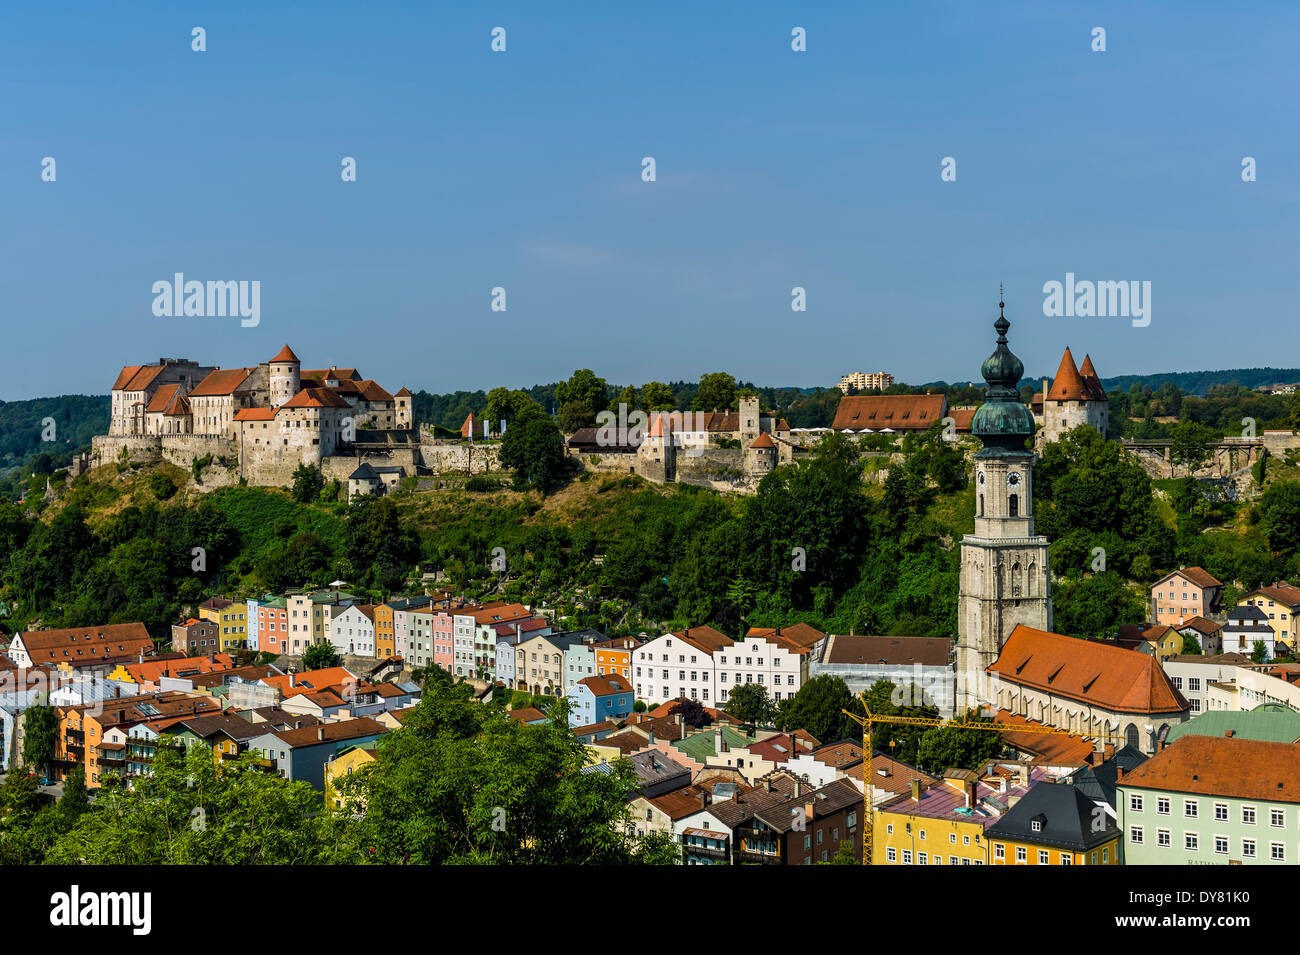 Germany, Bavaria, Burghausen, Cityscape with castle and church Stock Photo